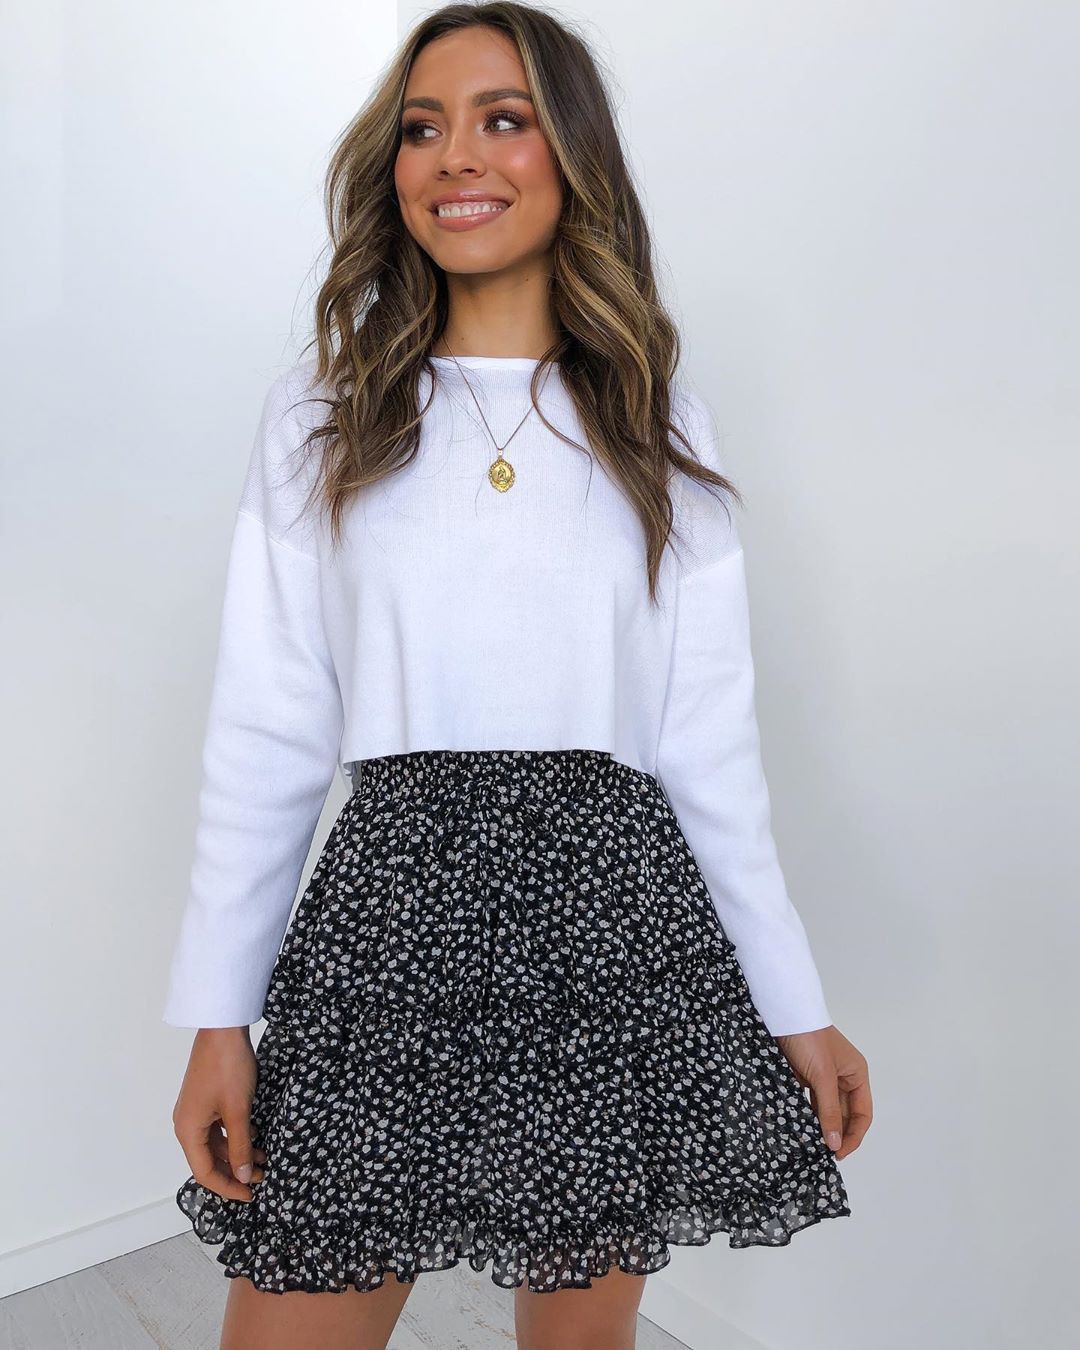 Black and white dresses ideas with miniskirt, trousers, skirt: Date Outfits,  Black And White Outfit  